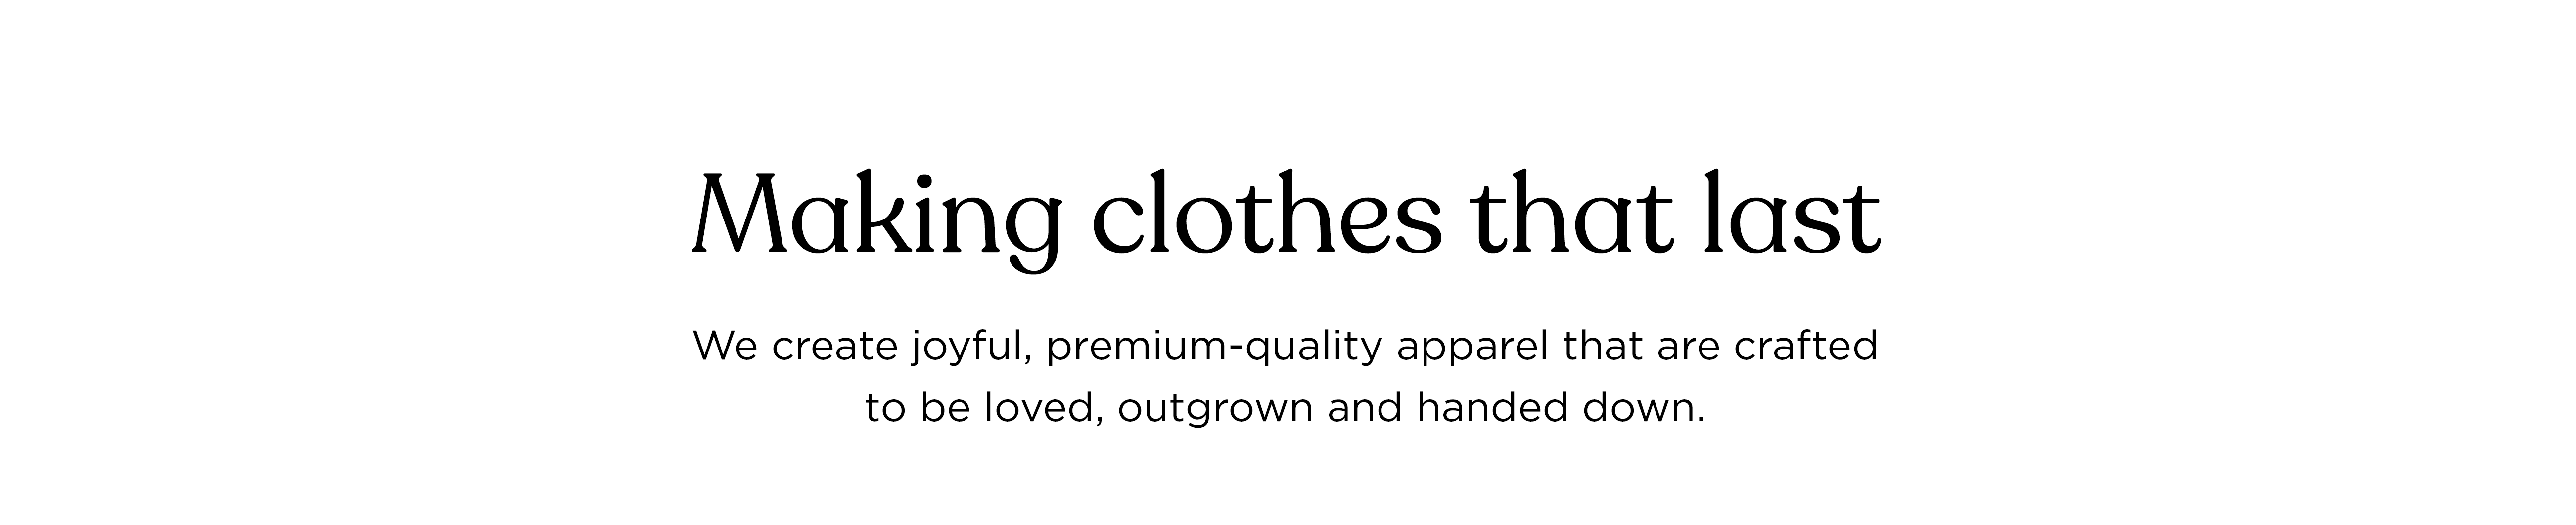 Making clothes that last: crafted to be loved, outgrown and handed down